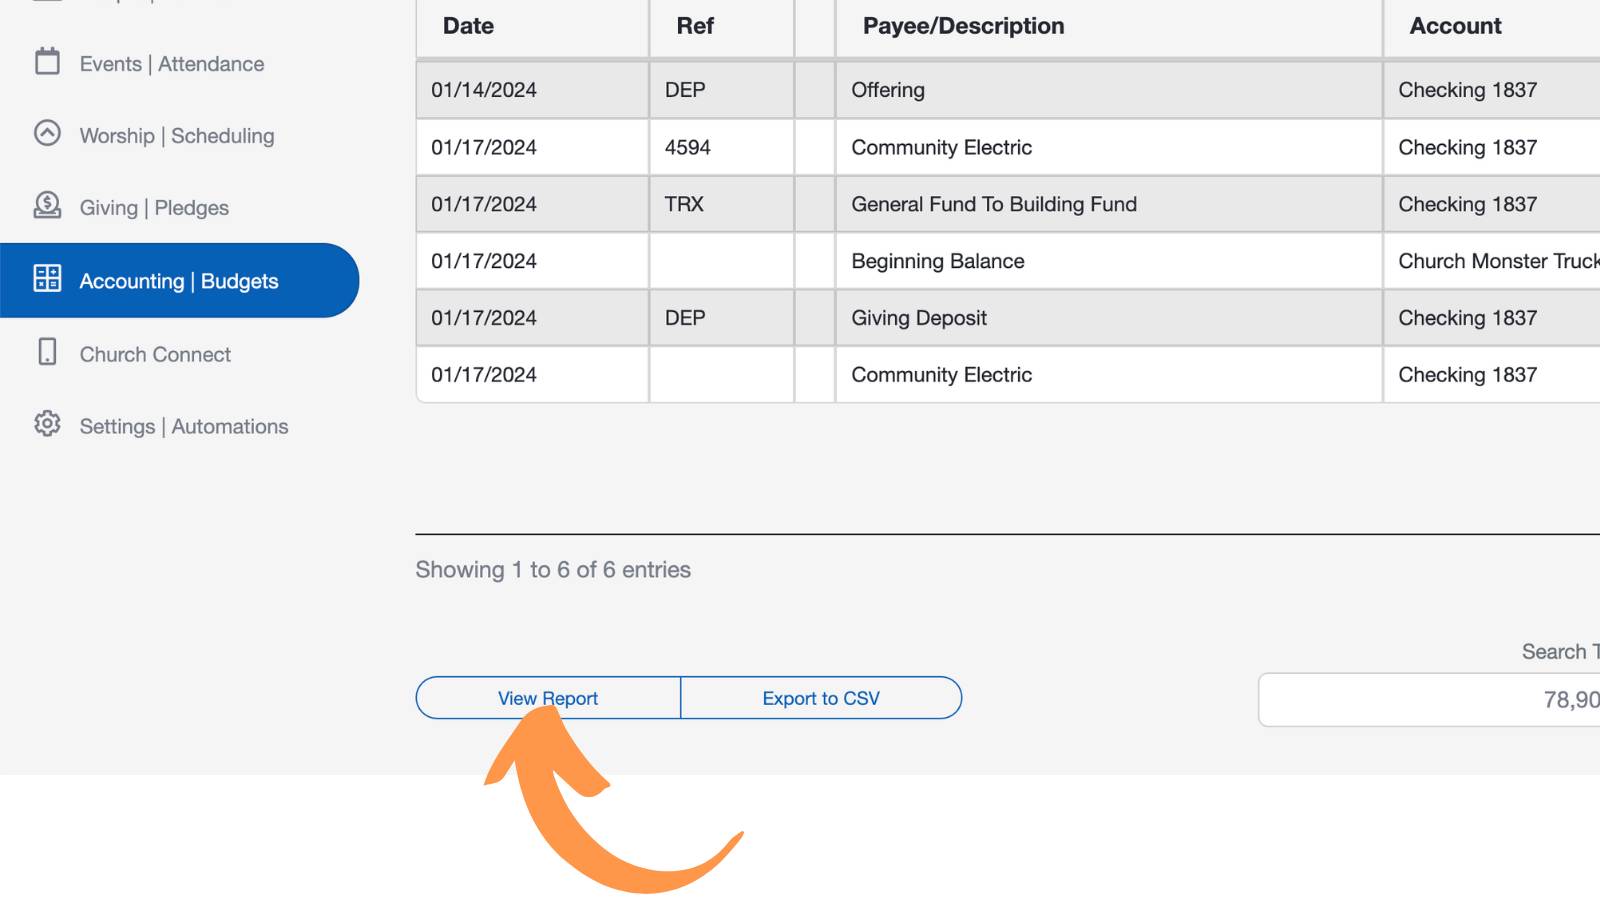 Search your church accounting transactions